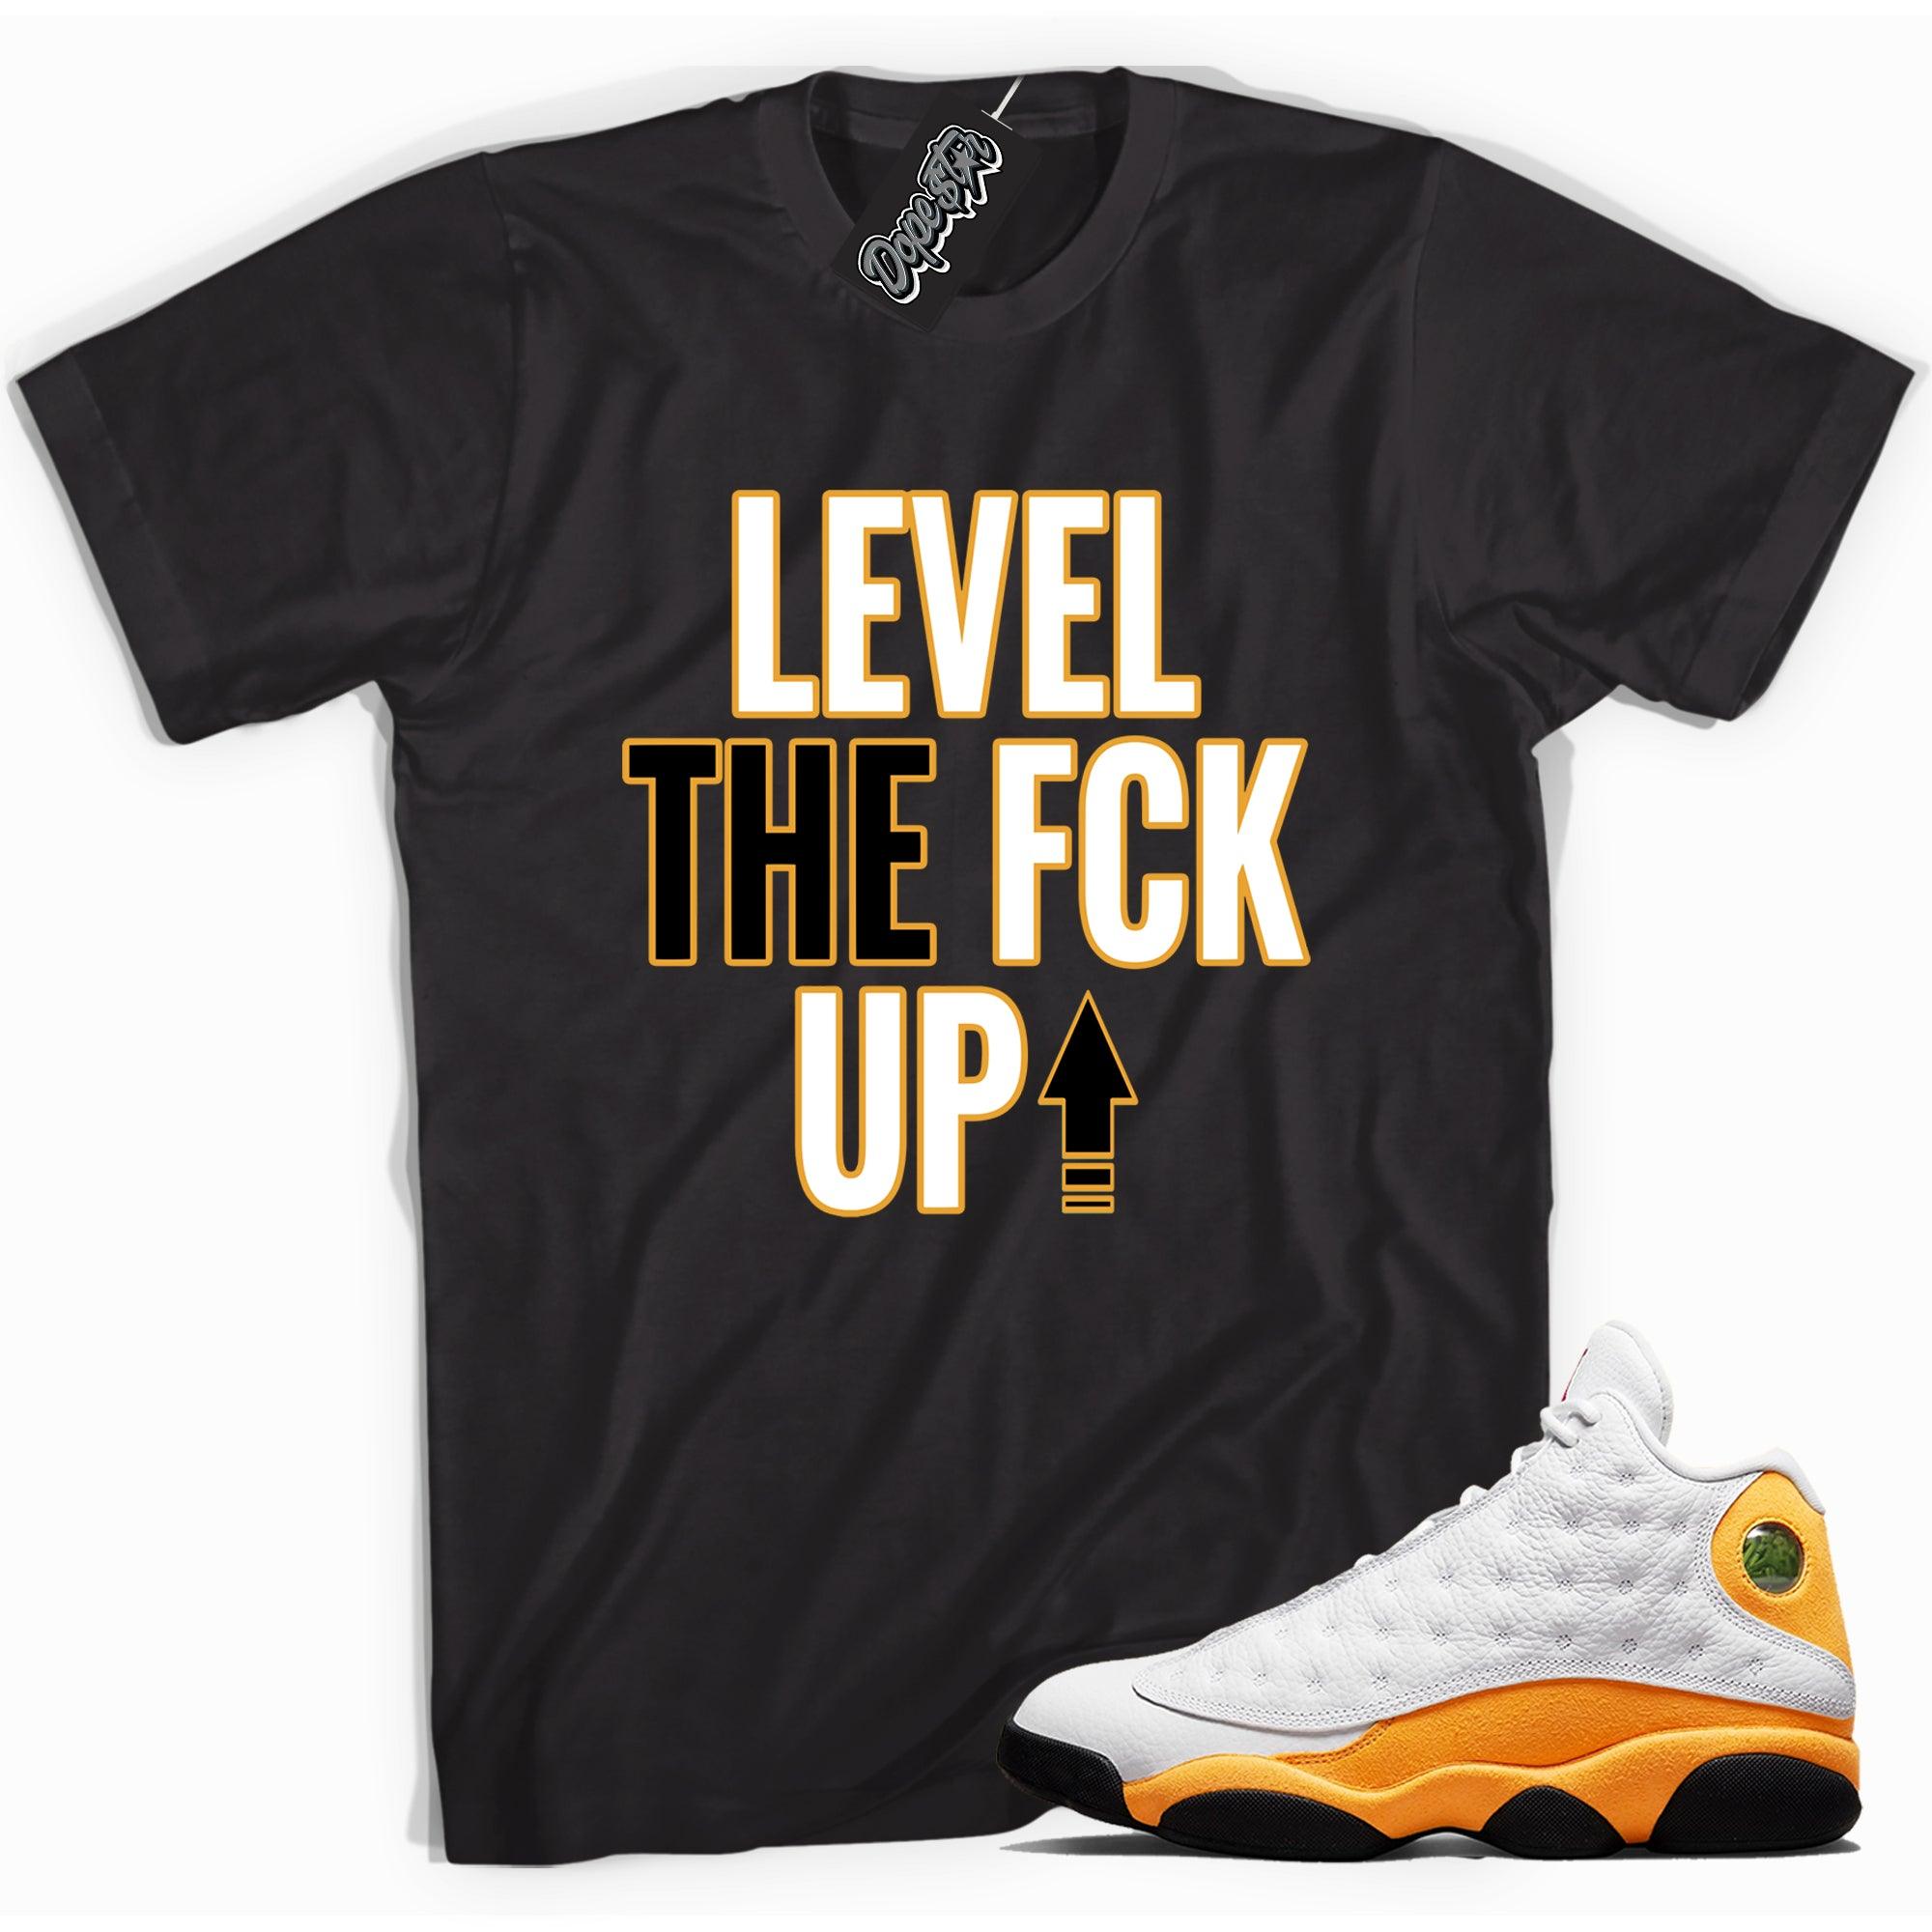 Cool black graphic tee with 'Level Up' print, that perfectly matches Air Jordan 13 Retro Del Sol Toe sneakers.